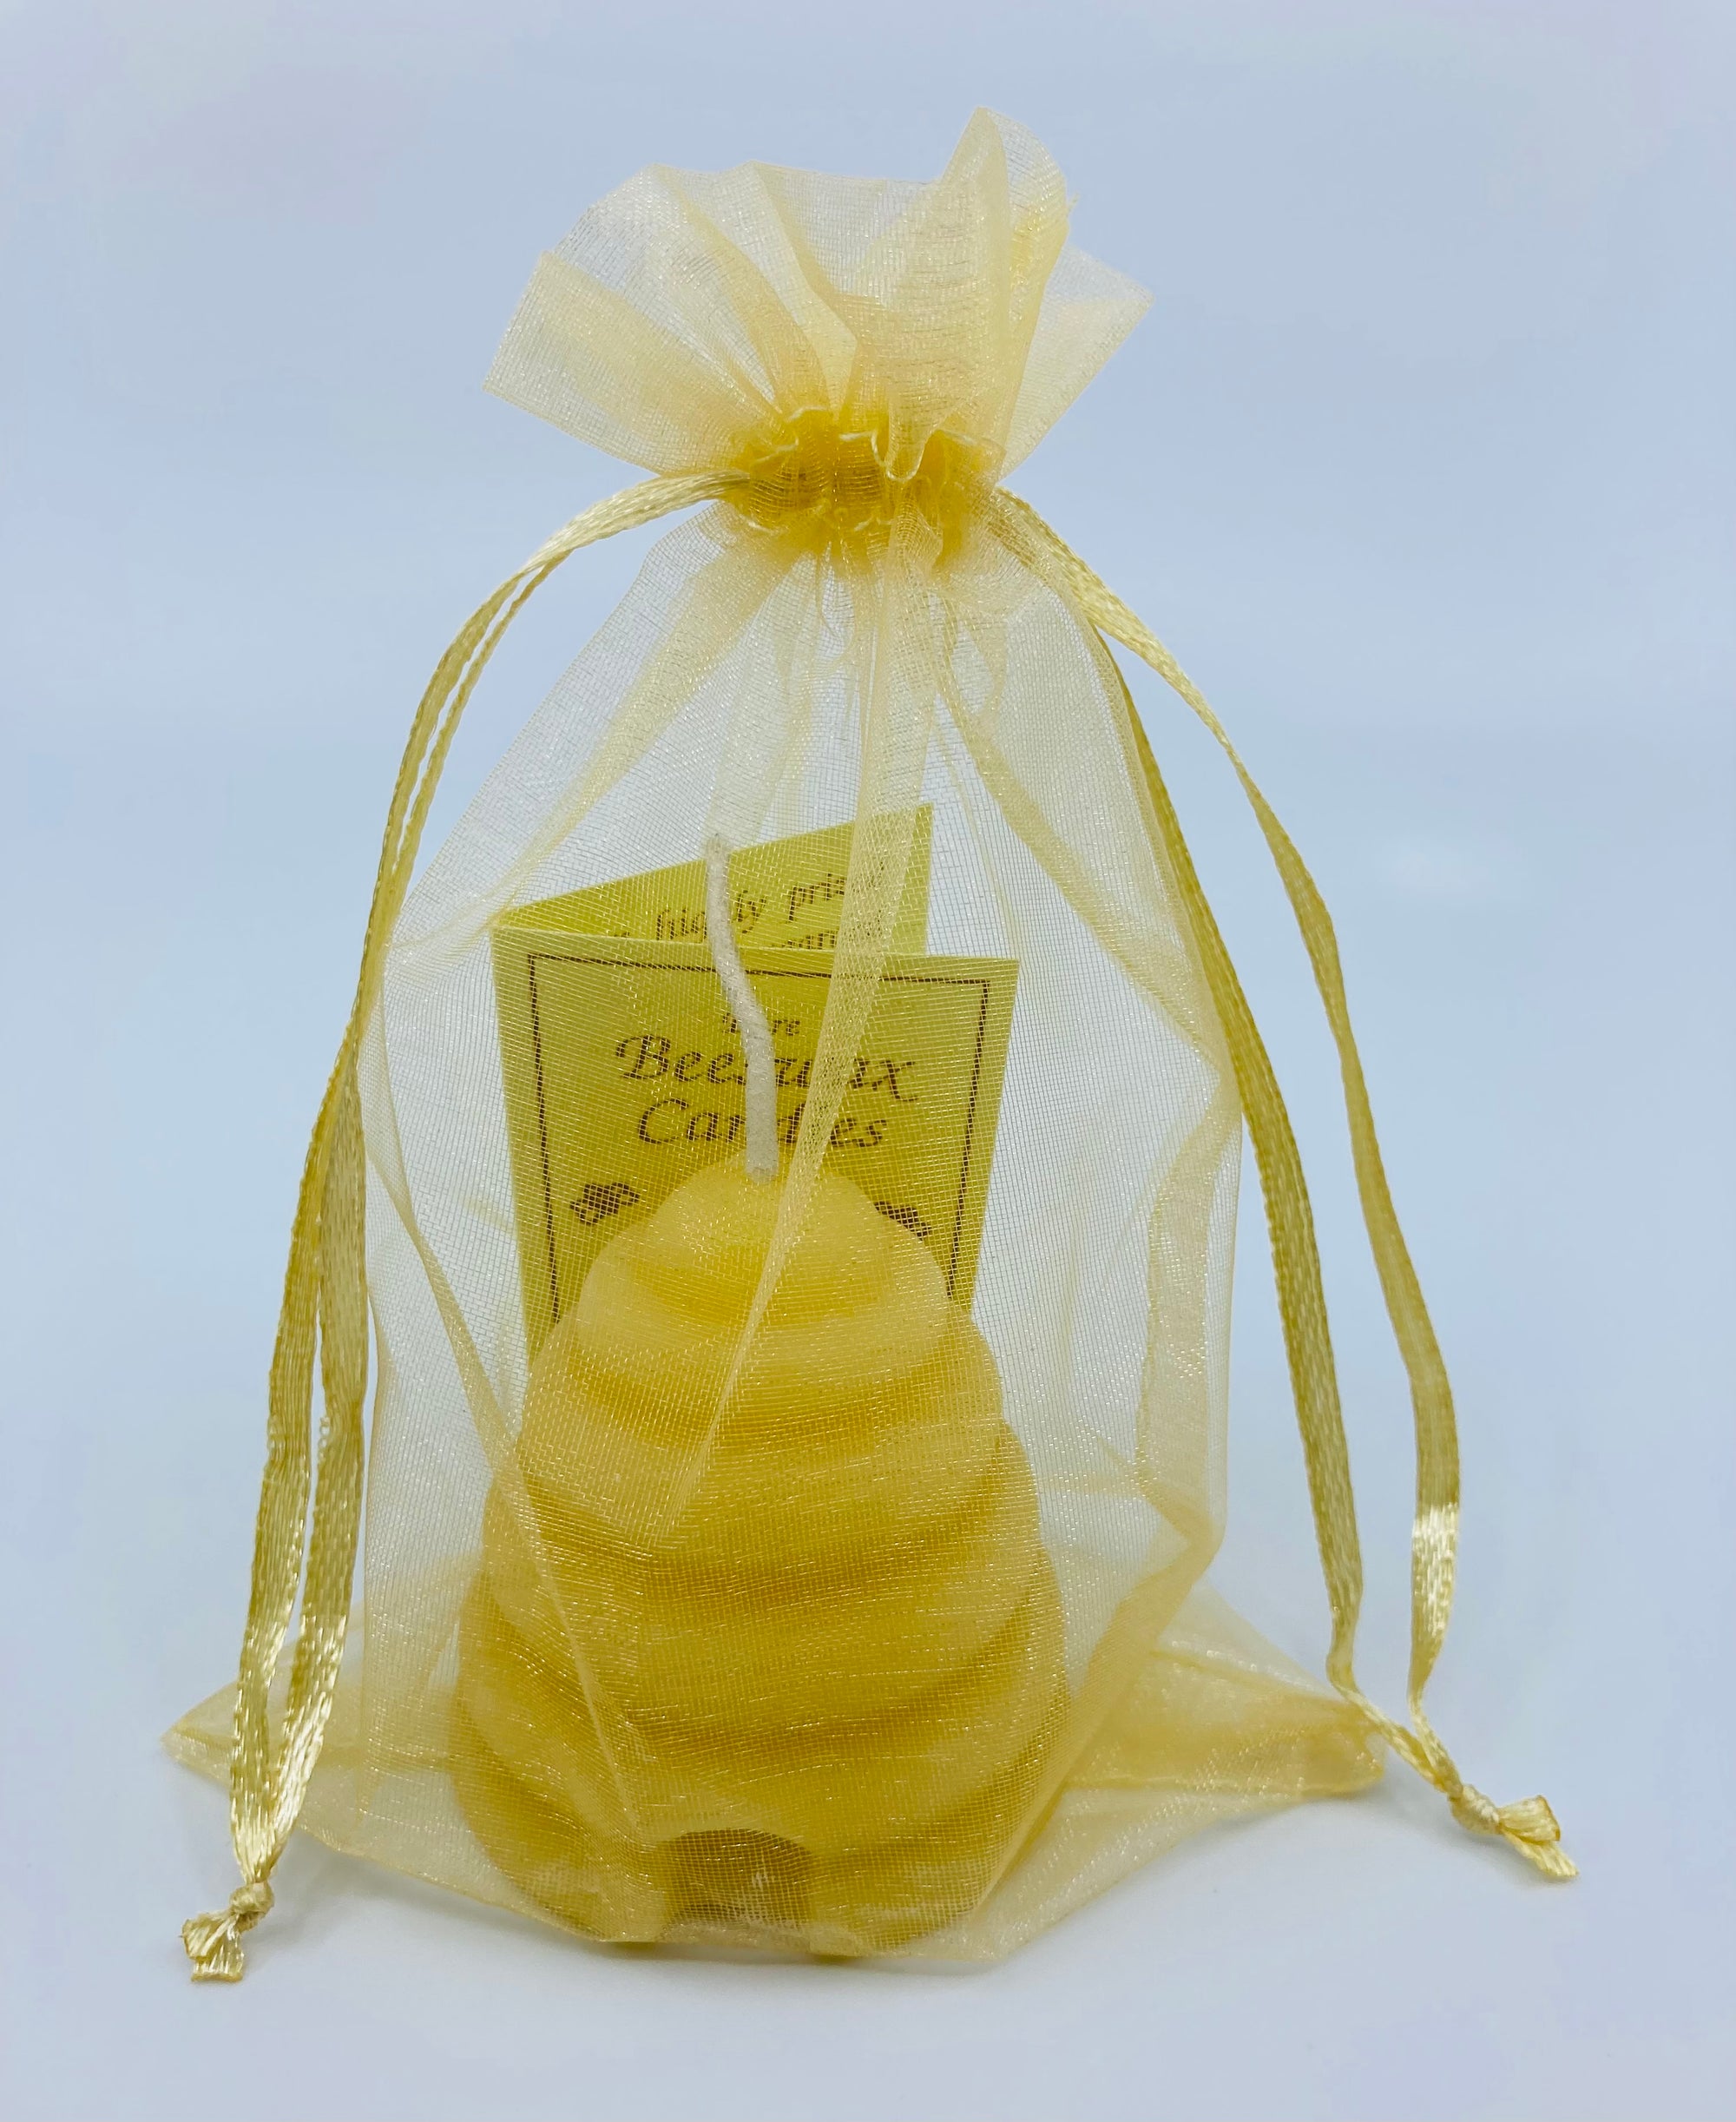 This candle is 100% beeswax and will burn for many hours.  It is approximately 3 inches in height and is in the shape of an old-fashioned beehive.  Please note that since beeswax is a natural resource that colors will range from pale yellow to deep gold.